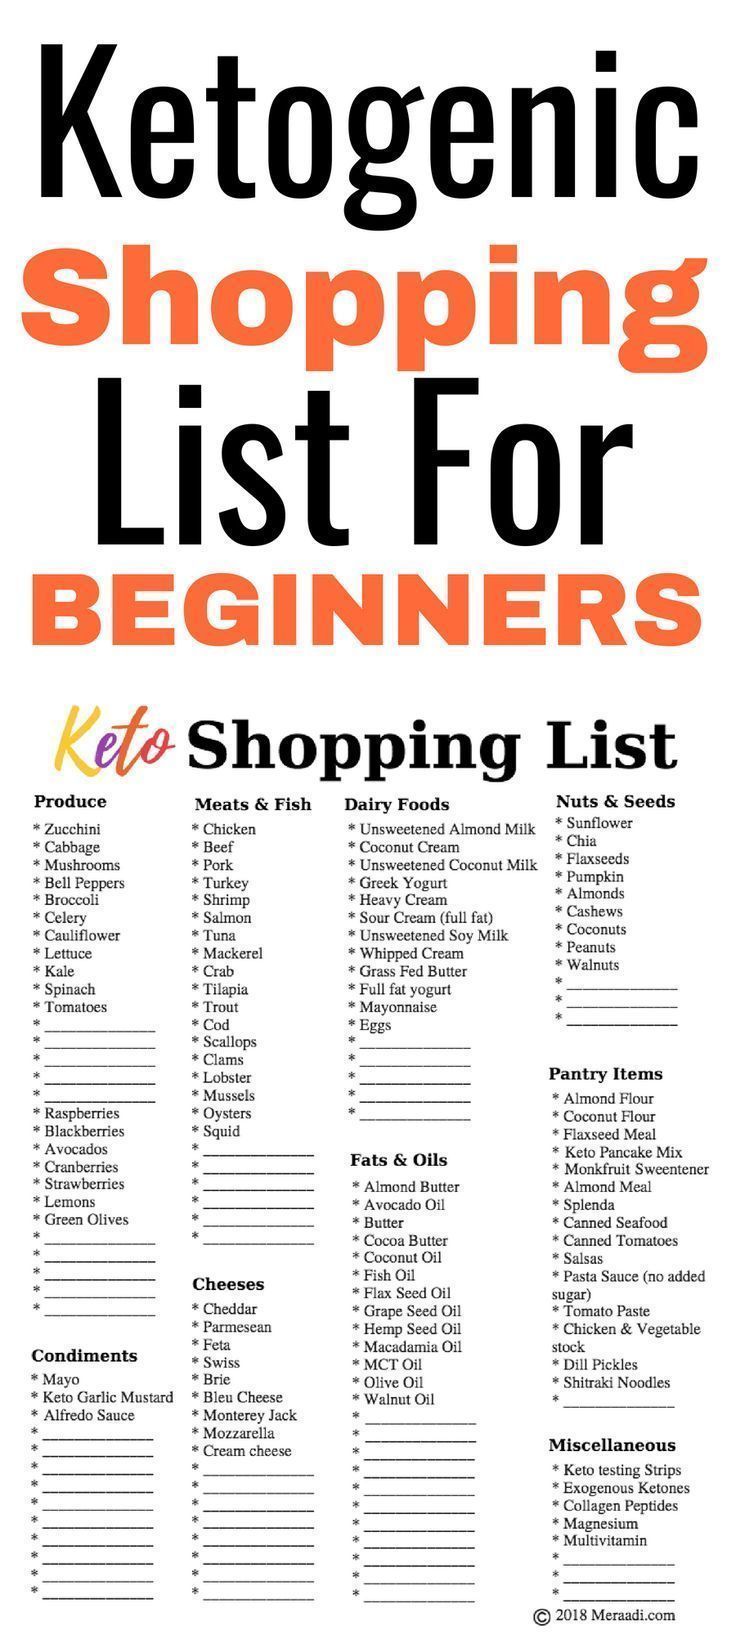 Ketogenic Shopping List For Beginners -   14 diet Logo awesome ideas